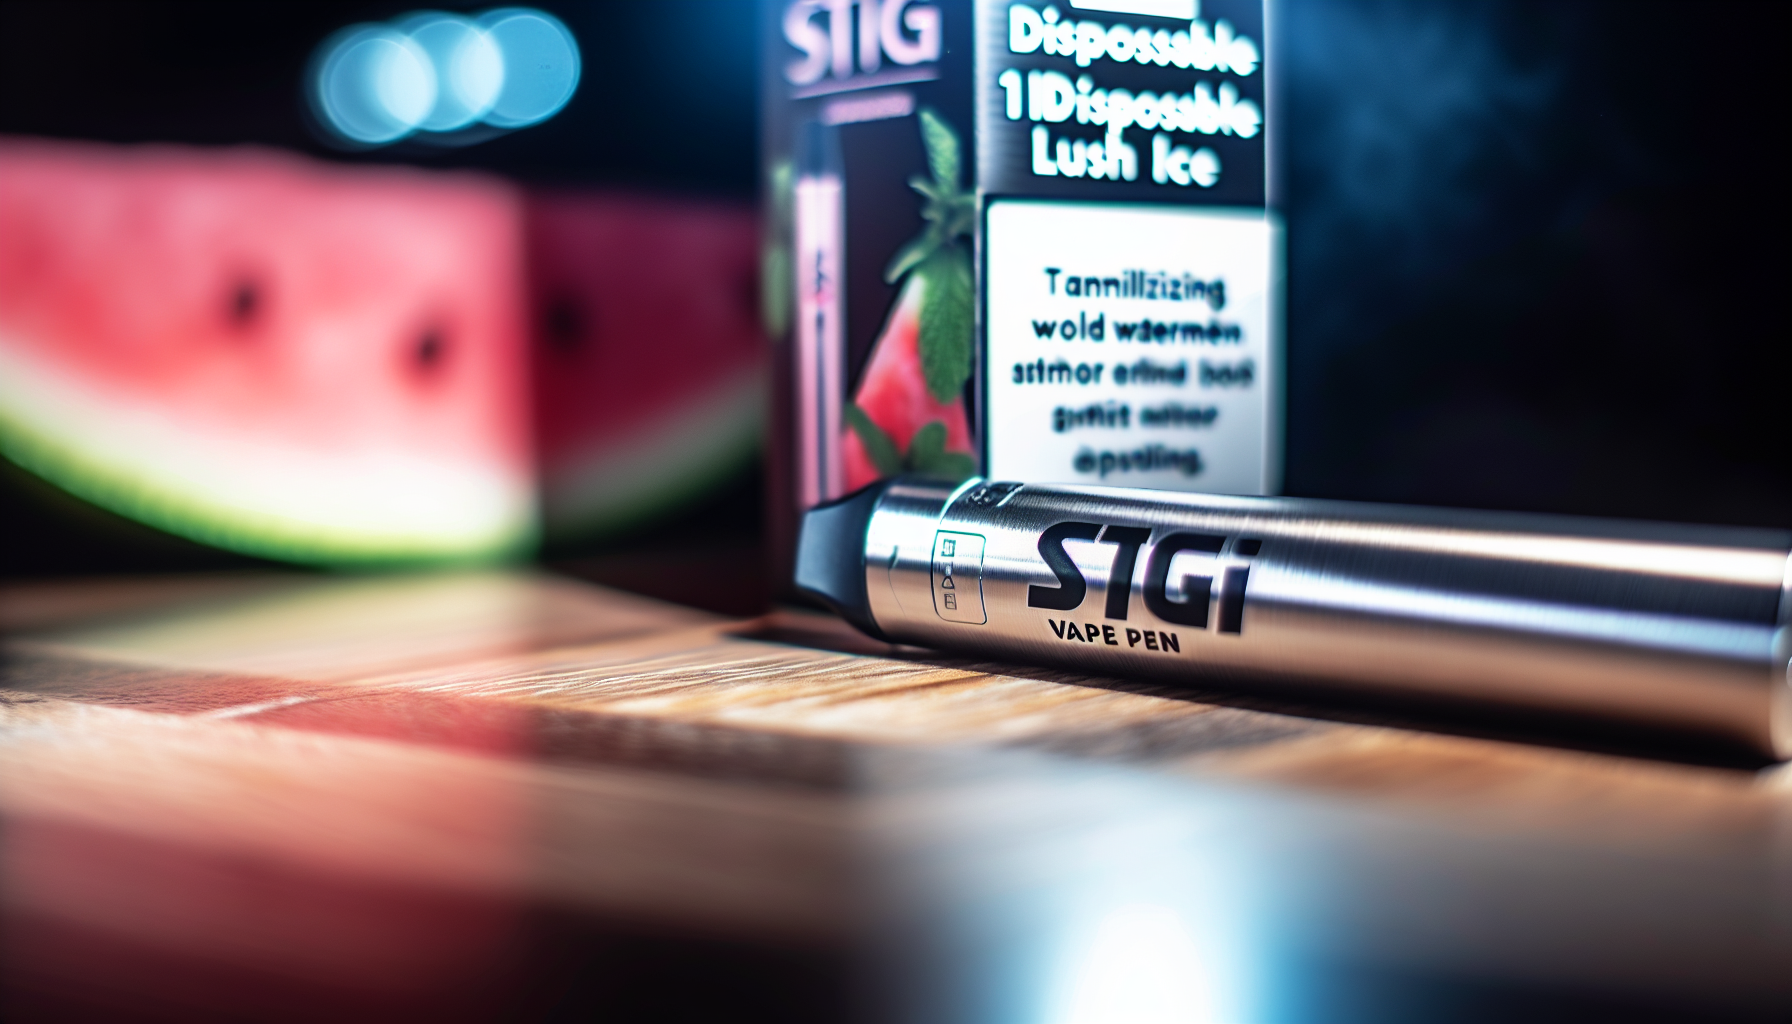 Stig Vape Pen 1K Disposable Lush Ice with watermelon and menthol flavor